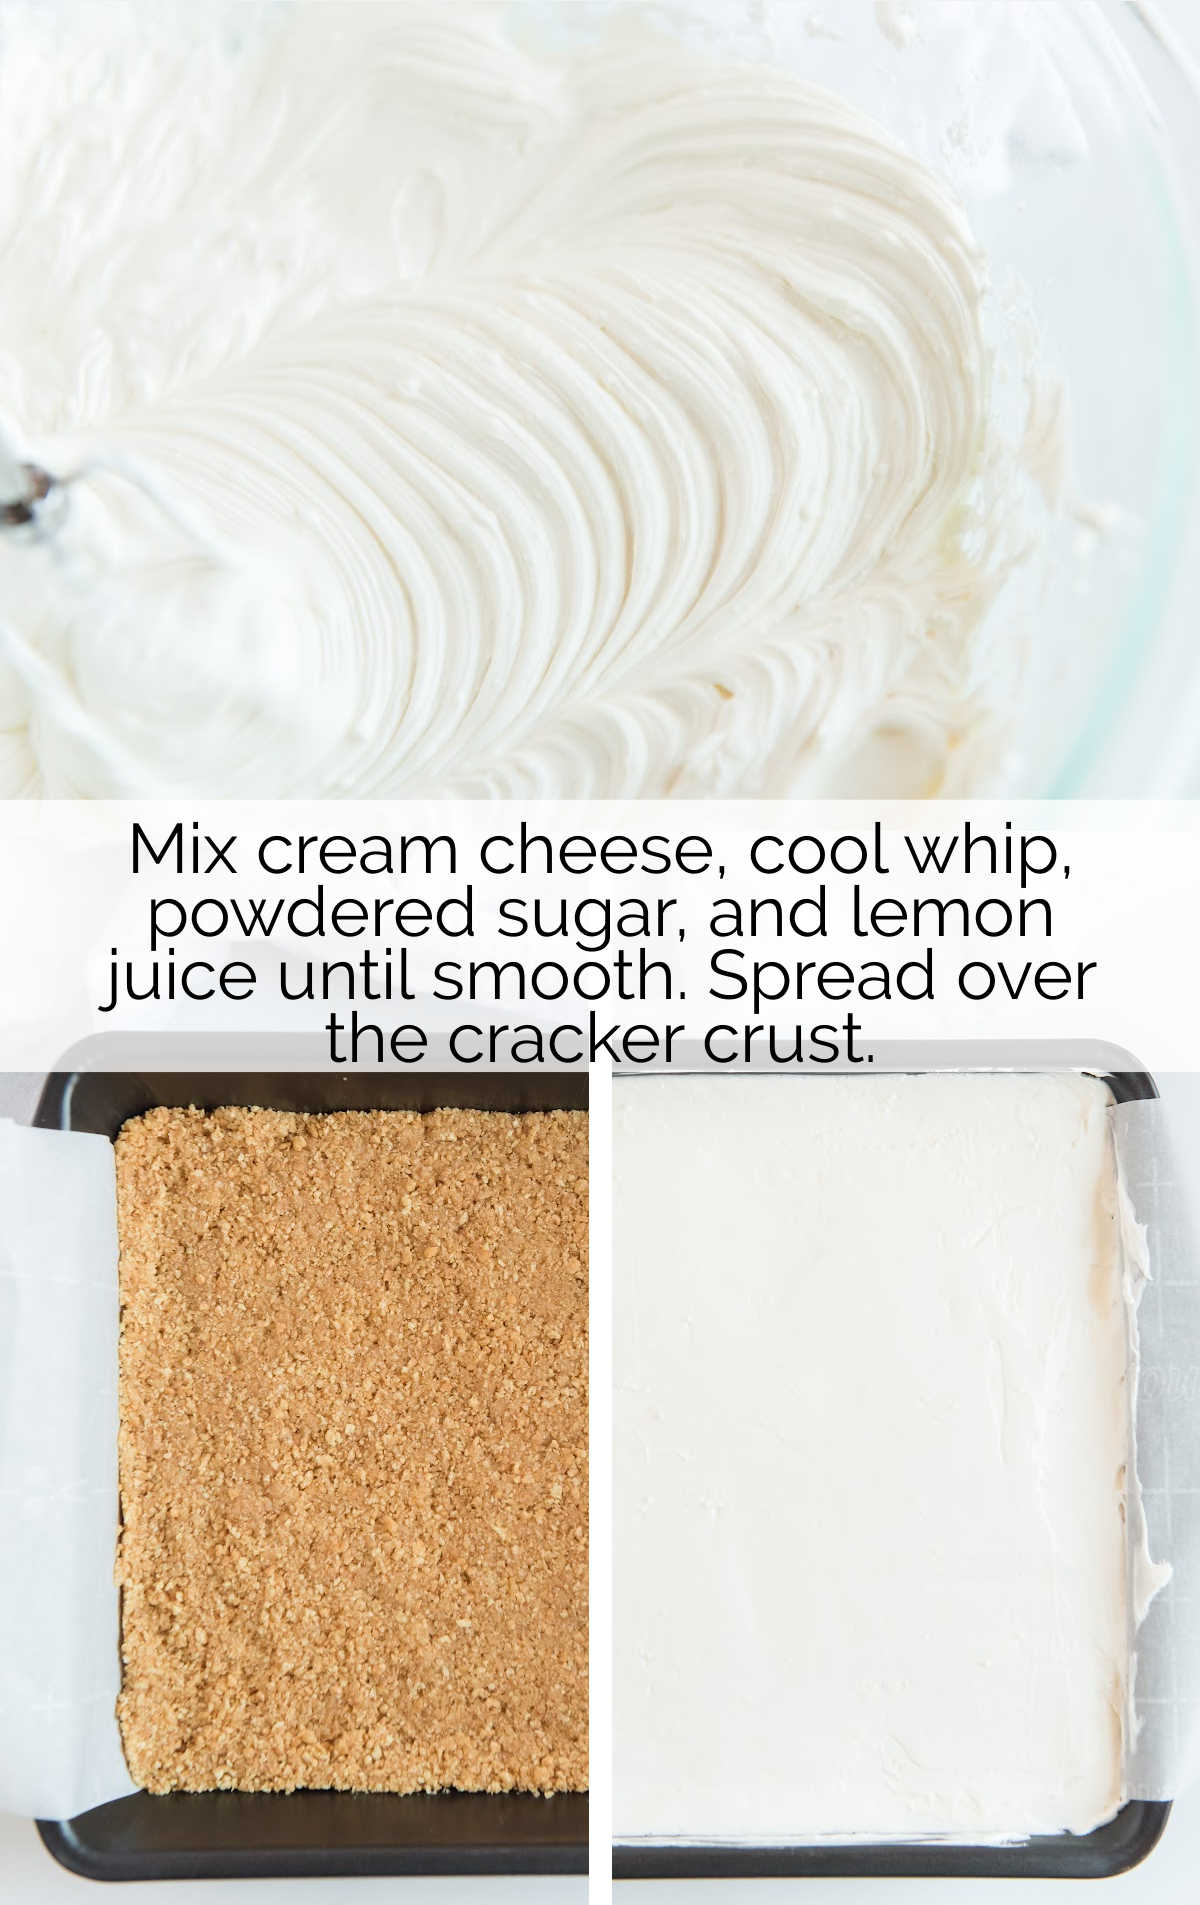 graham cracker crusted spread into a baking dish then topped with cream cheese mixture